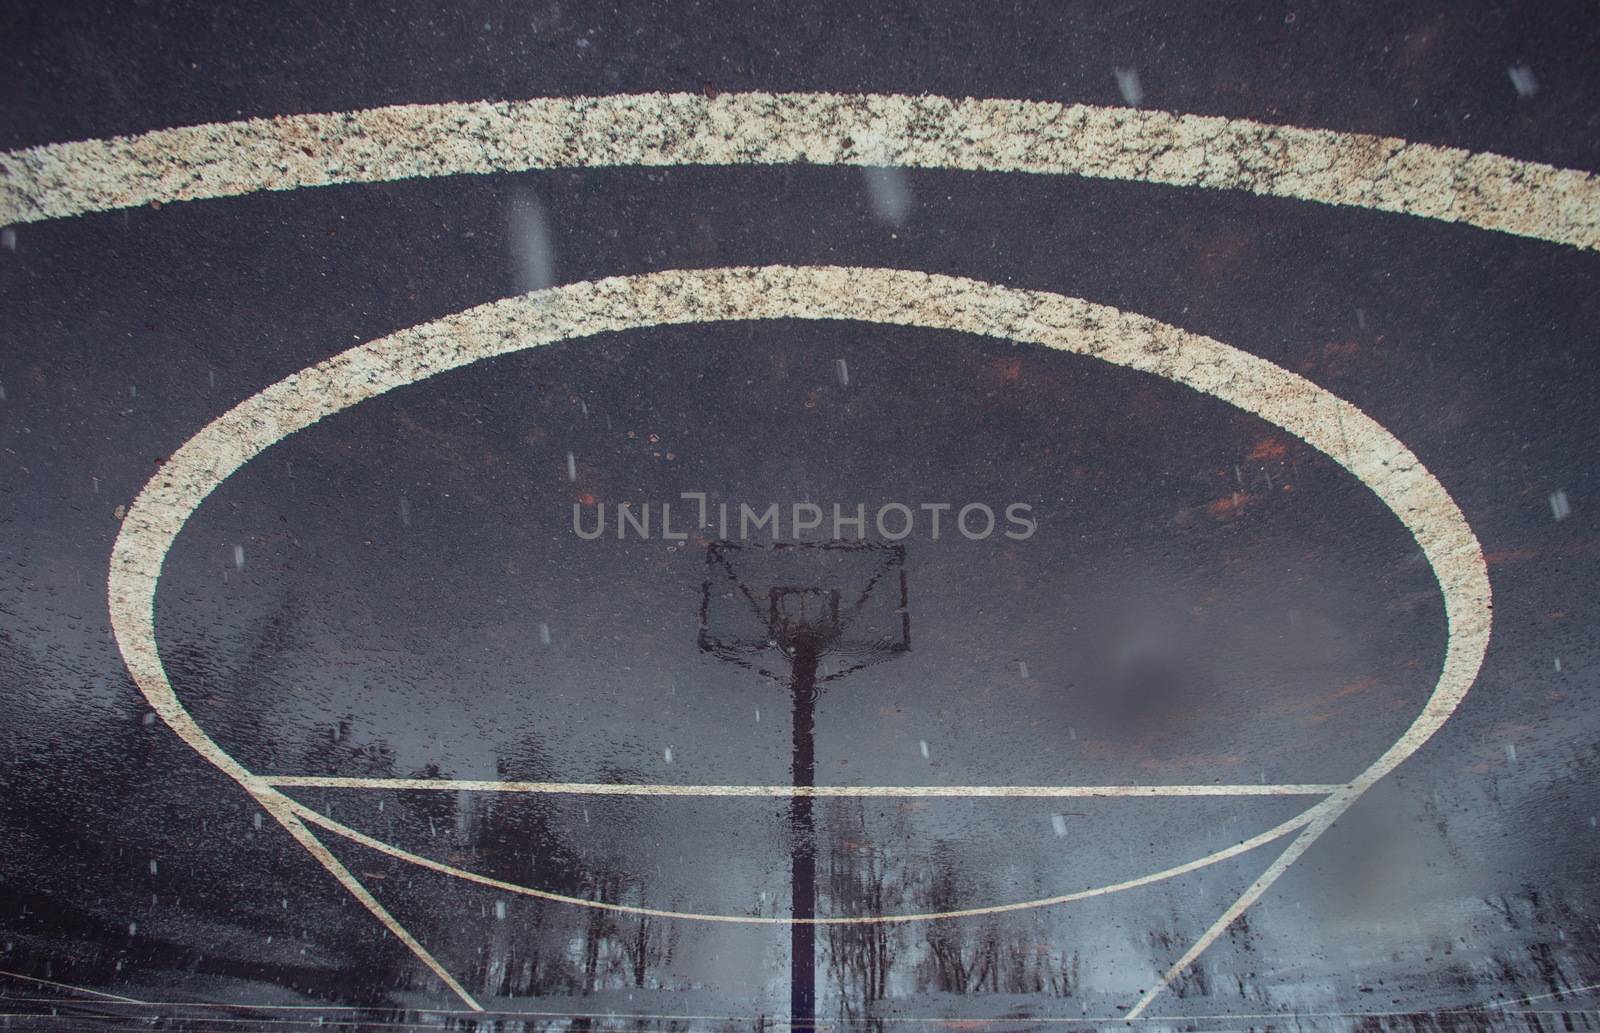 Basketball court after rain. Basketball half-court line. Outdoor court wet with rain. Court with reflective water. Tree and sun reflection on water. Abstract art. Minimal design. Abstract design